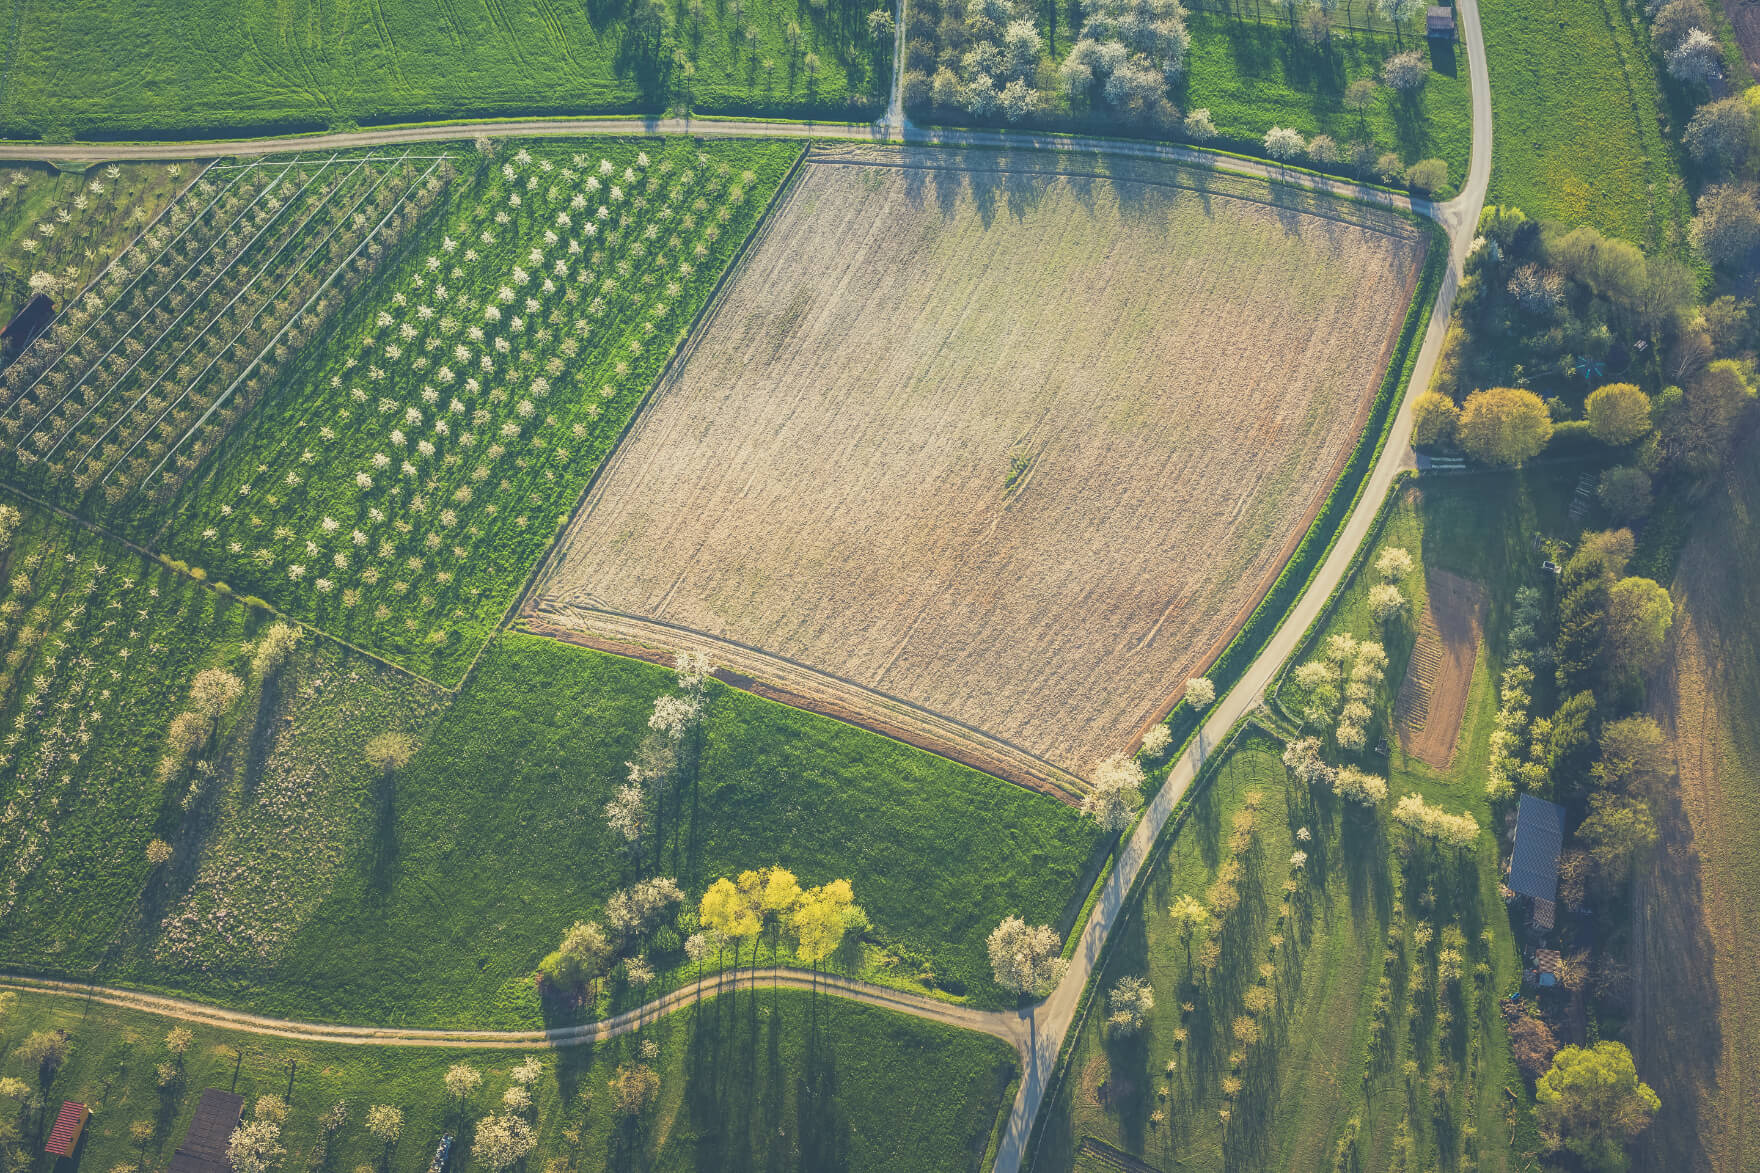 How agriculture’s digital transformation is enabled by IoT